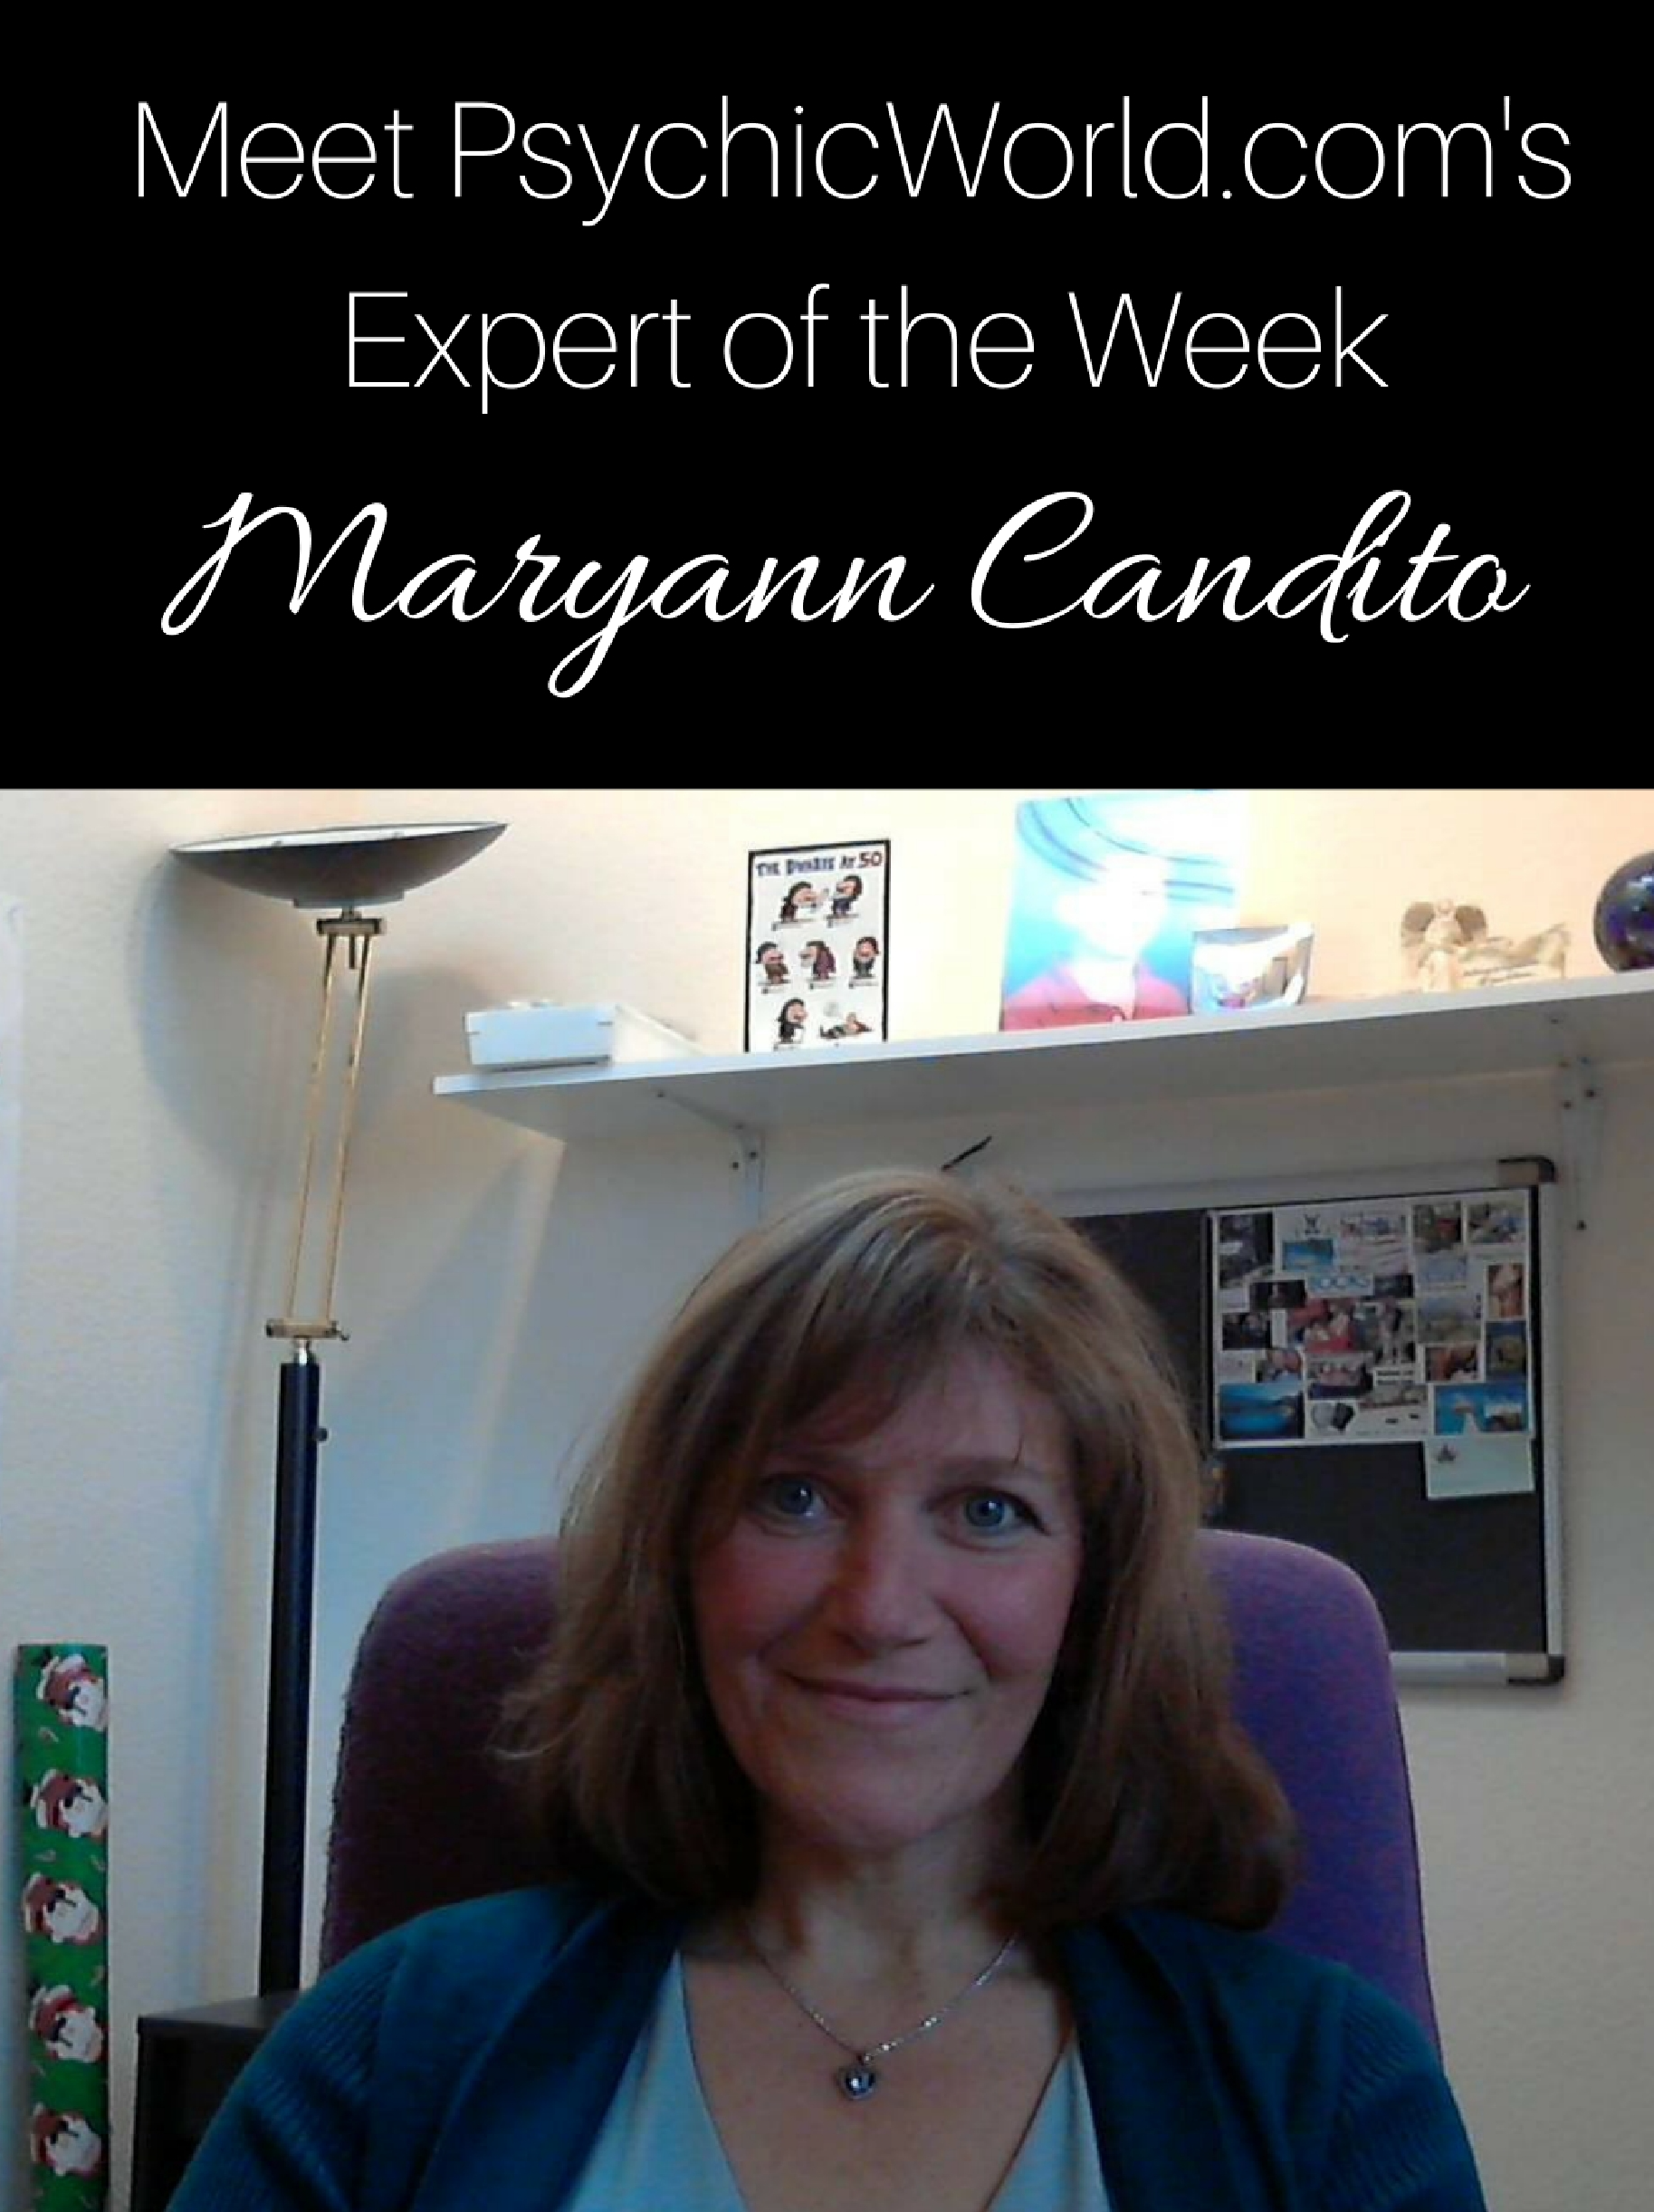 Meet Our Featured Expert of the Week, Maryann Candito